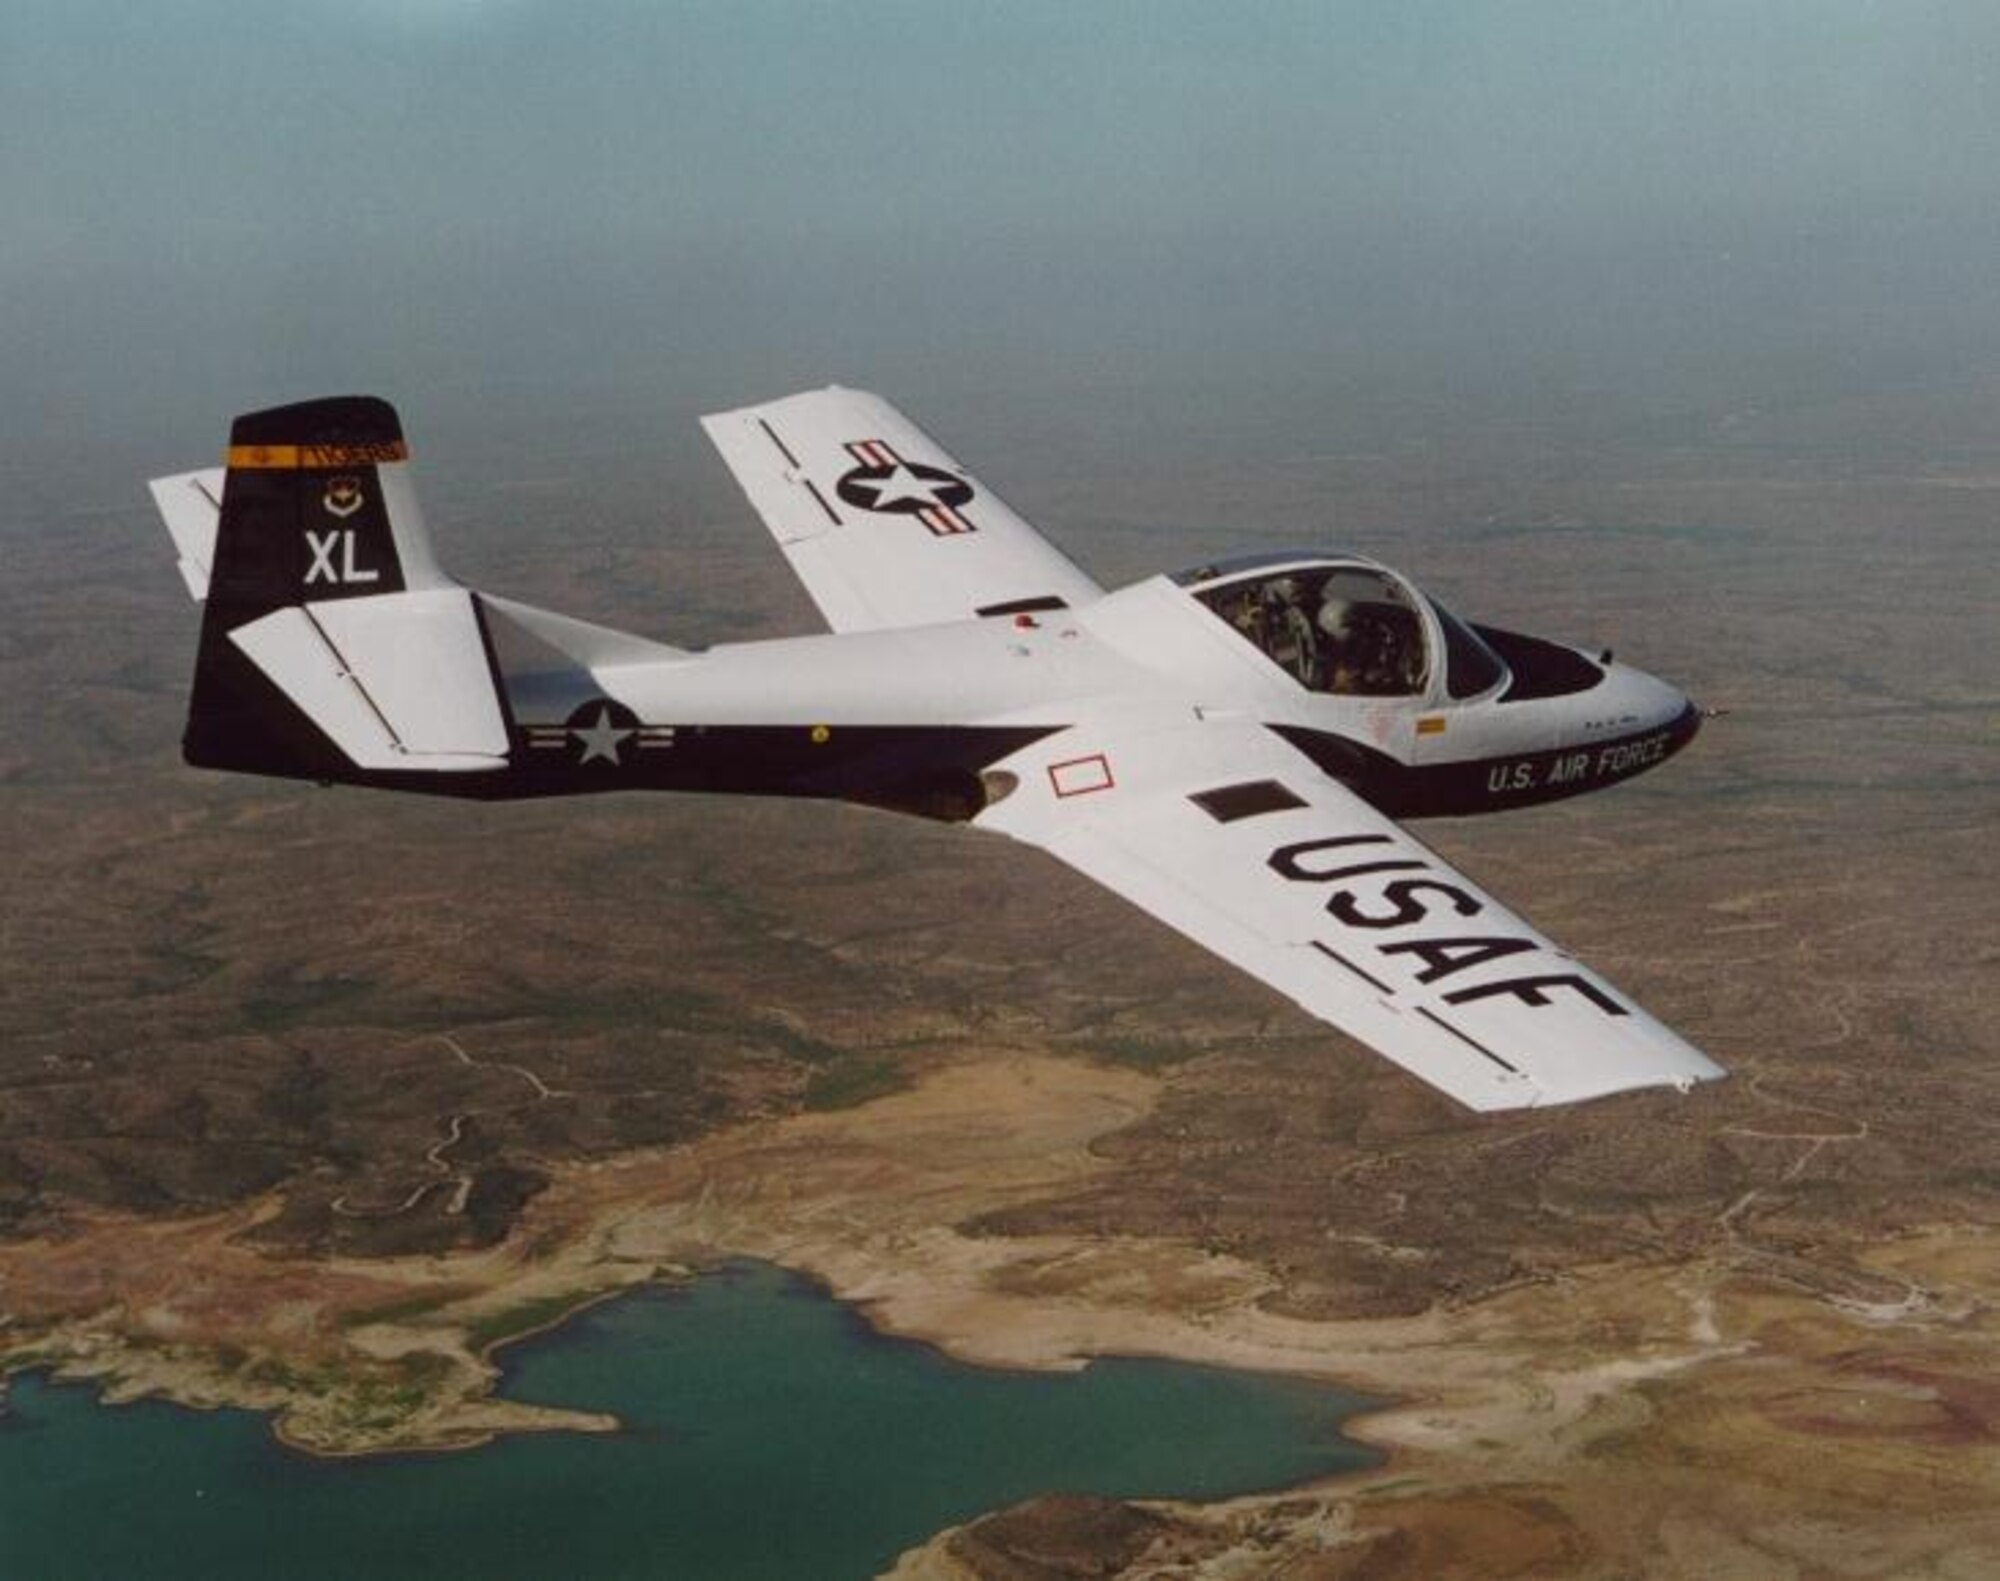 On May 8, 1998, the 85 Flying Training Squadron flew its millionth T-37 flying hour since the squadron activated in 1972. Captain Phillip Thompson and his student, 2nd Lt. Mary J. Harris of Class 99-03, flew the T-37B that marked the millionth hour. (U.S. Air Force photo)